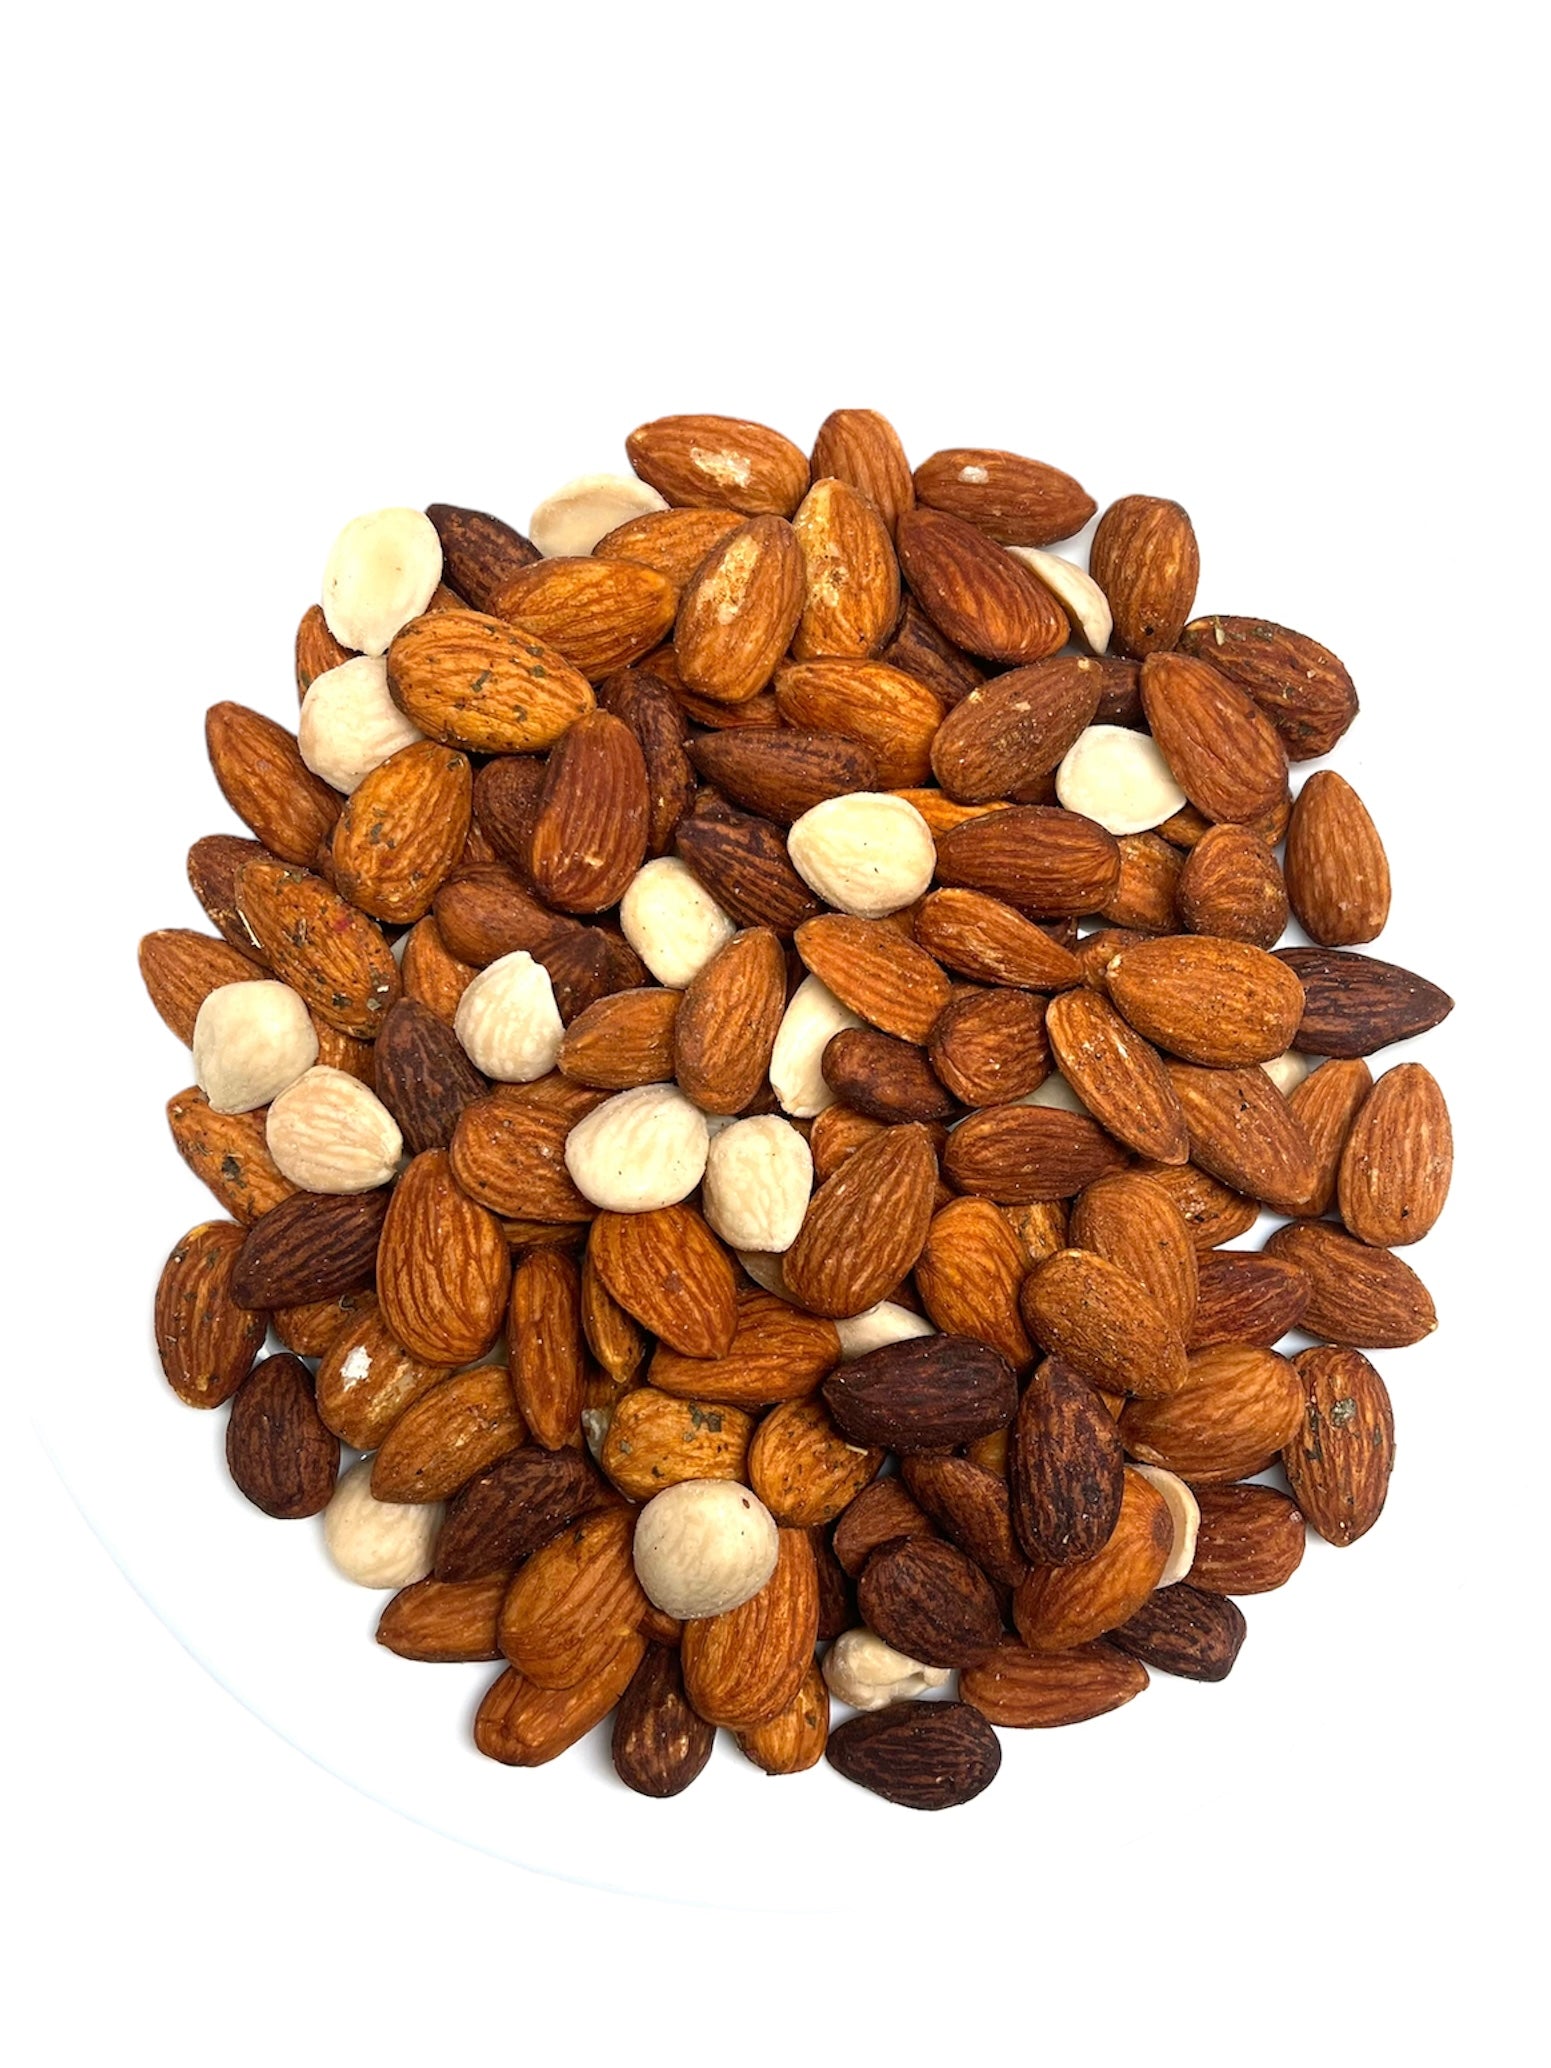 Mixed Almonds - Many Flavors